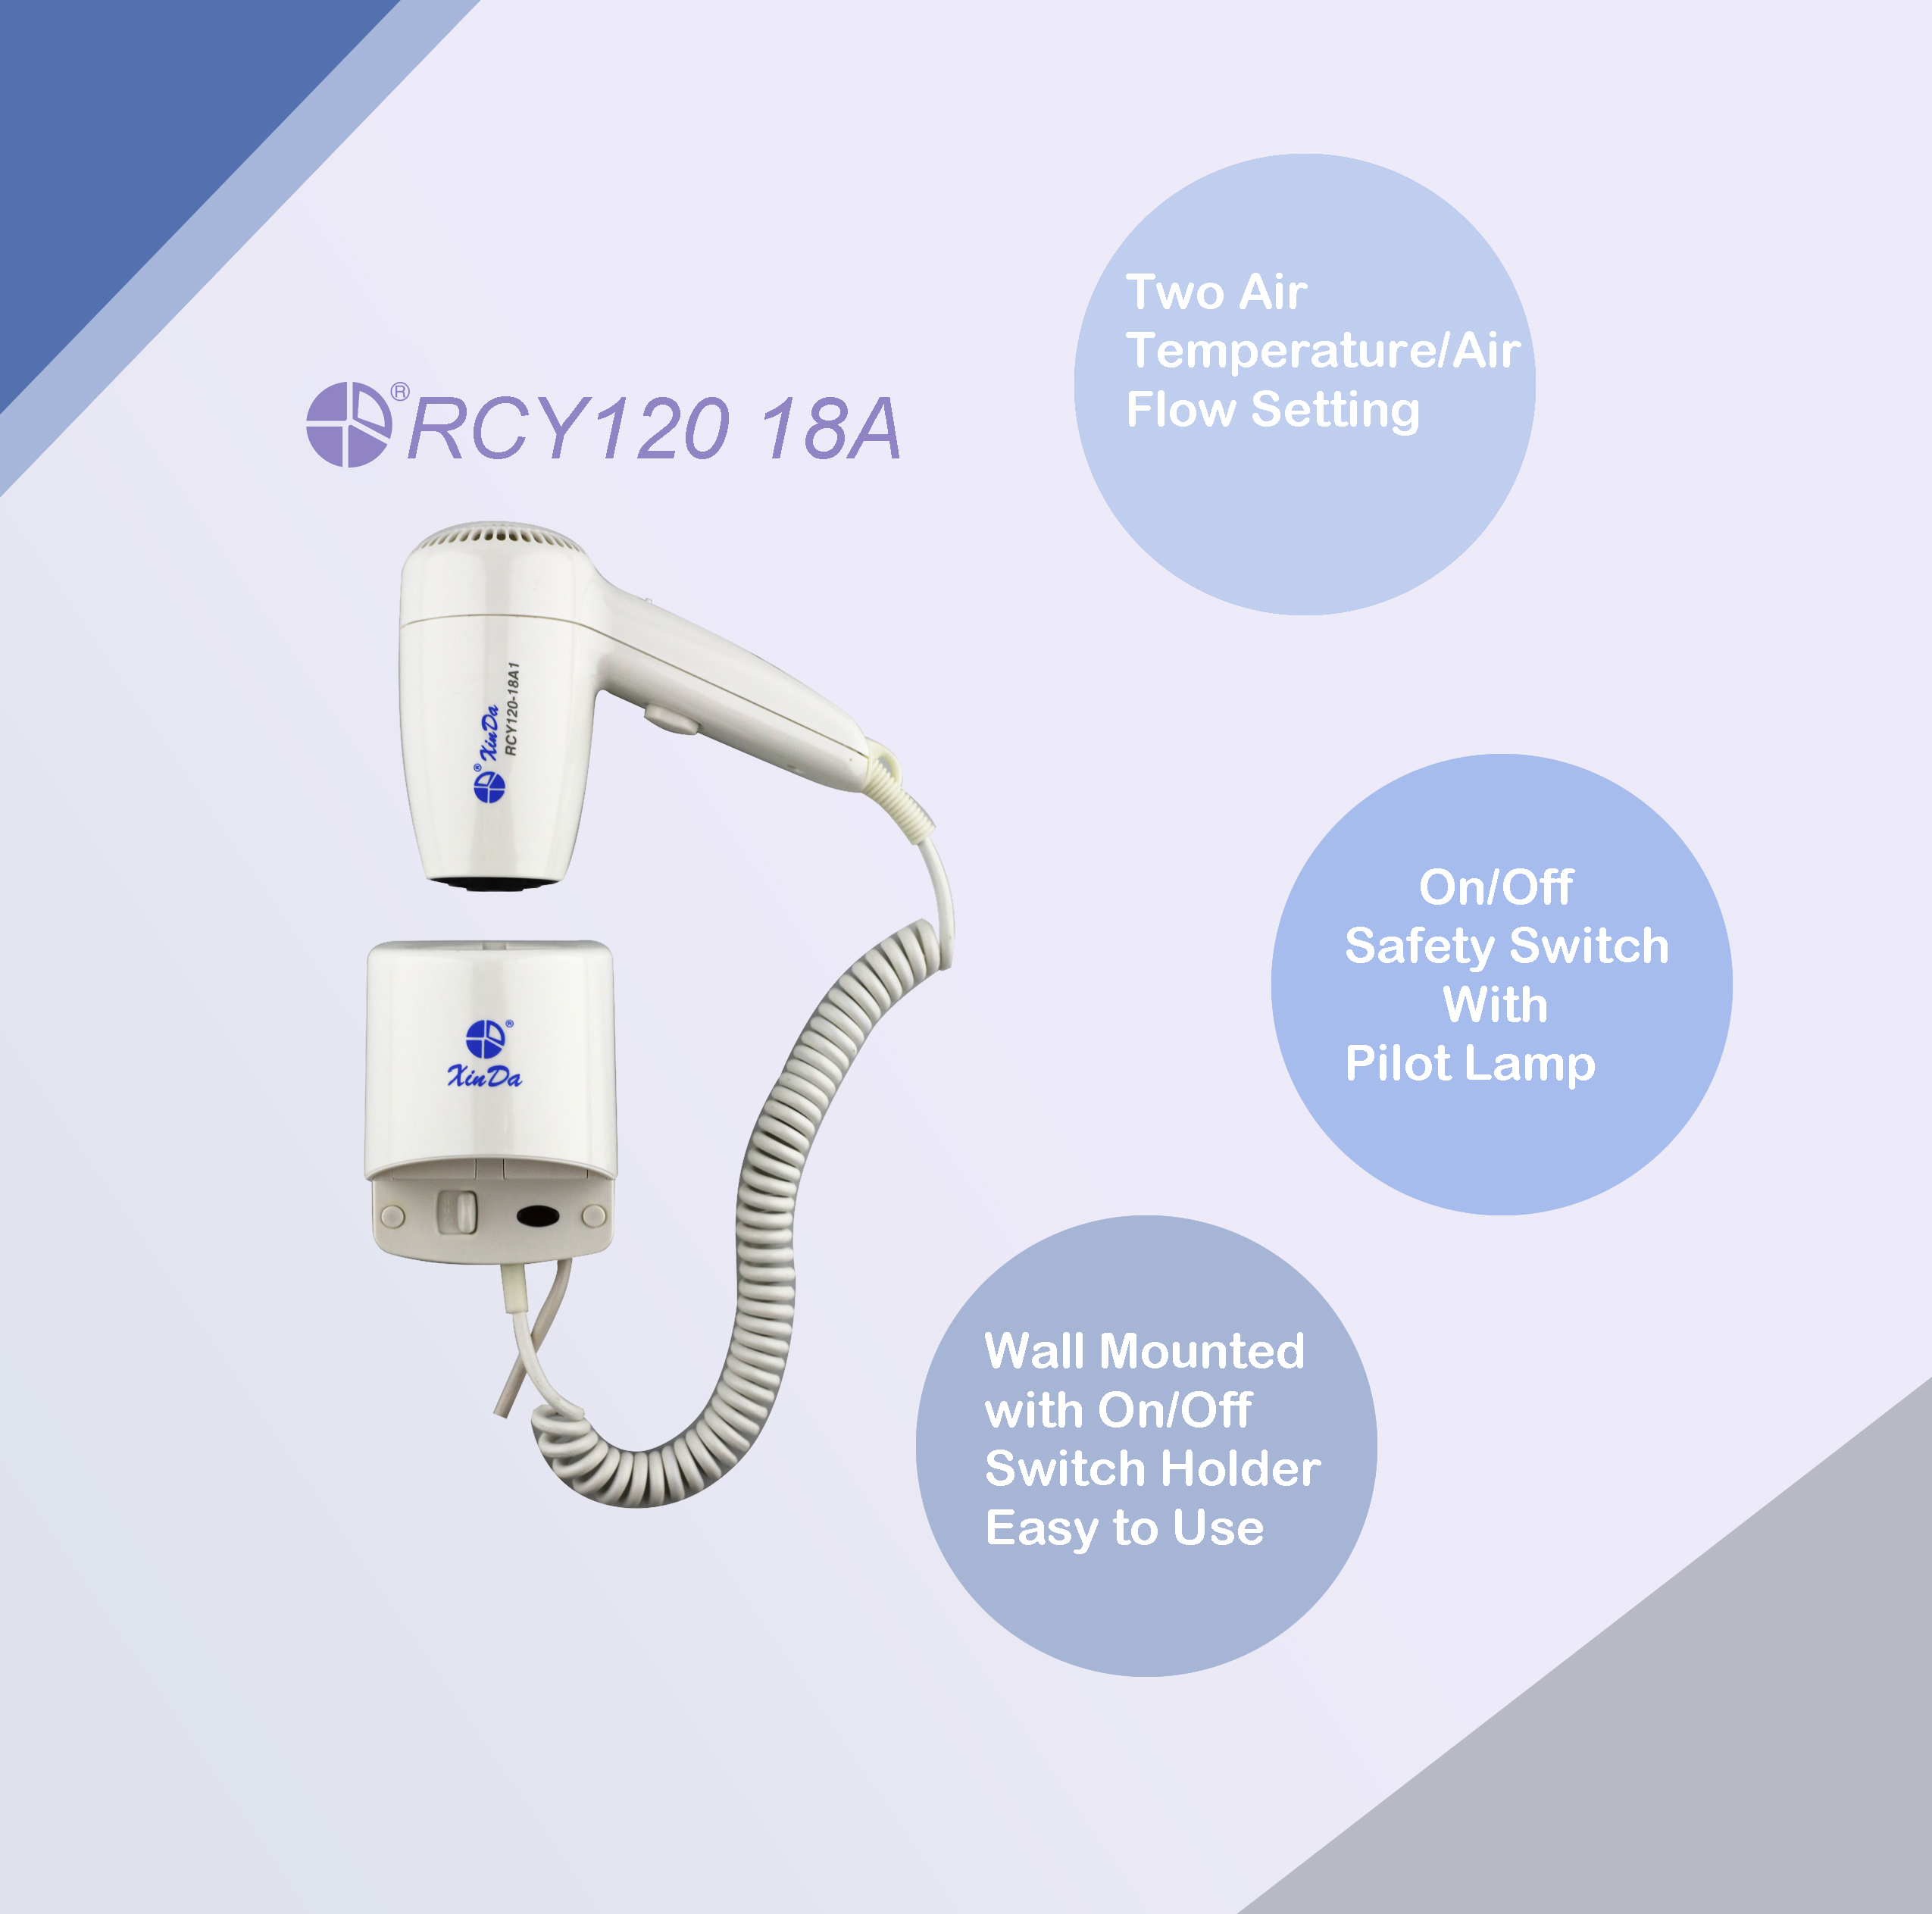 The XinDa RCY-120 18A New Design Professional White Wireless Rechargeable Hair Dryer, Battery Hair Dryer ABD-1000 Hair Dryer